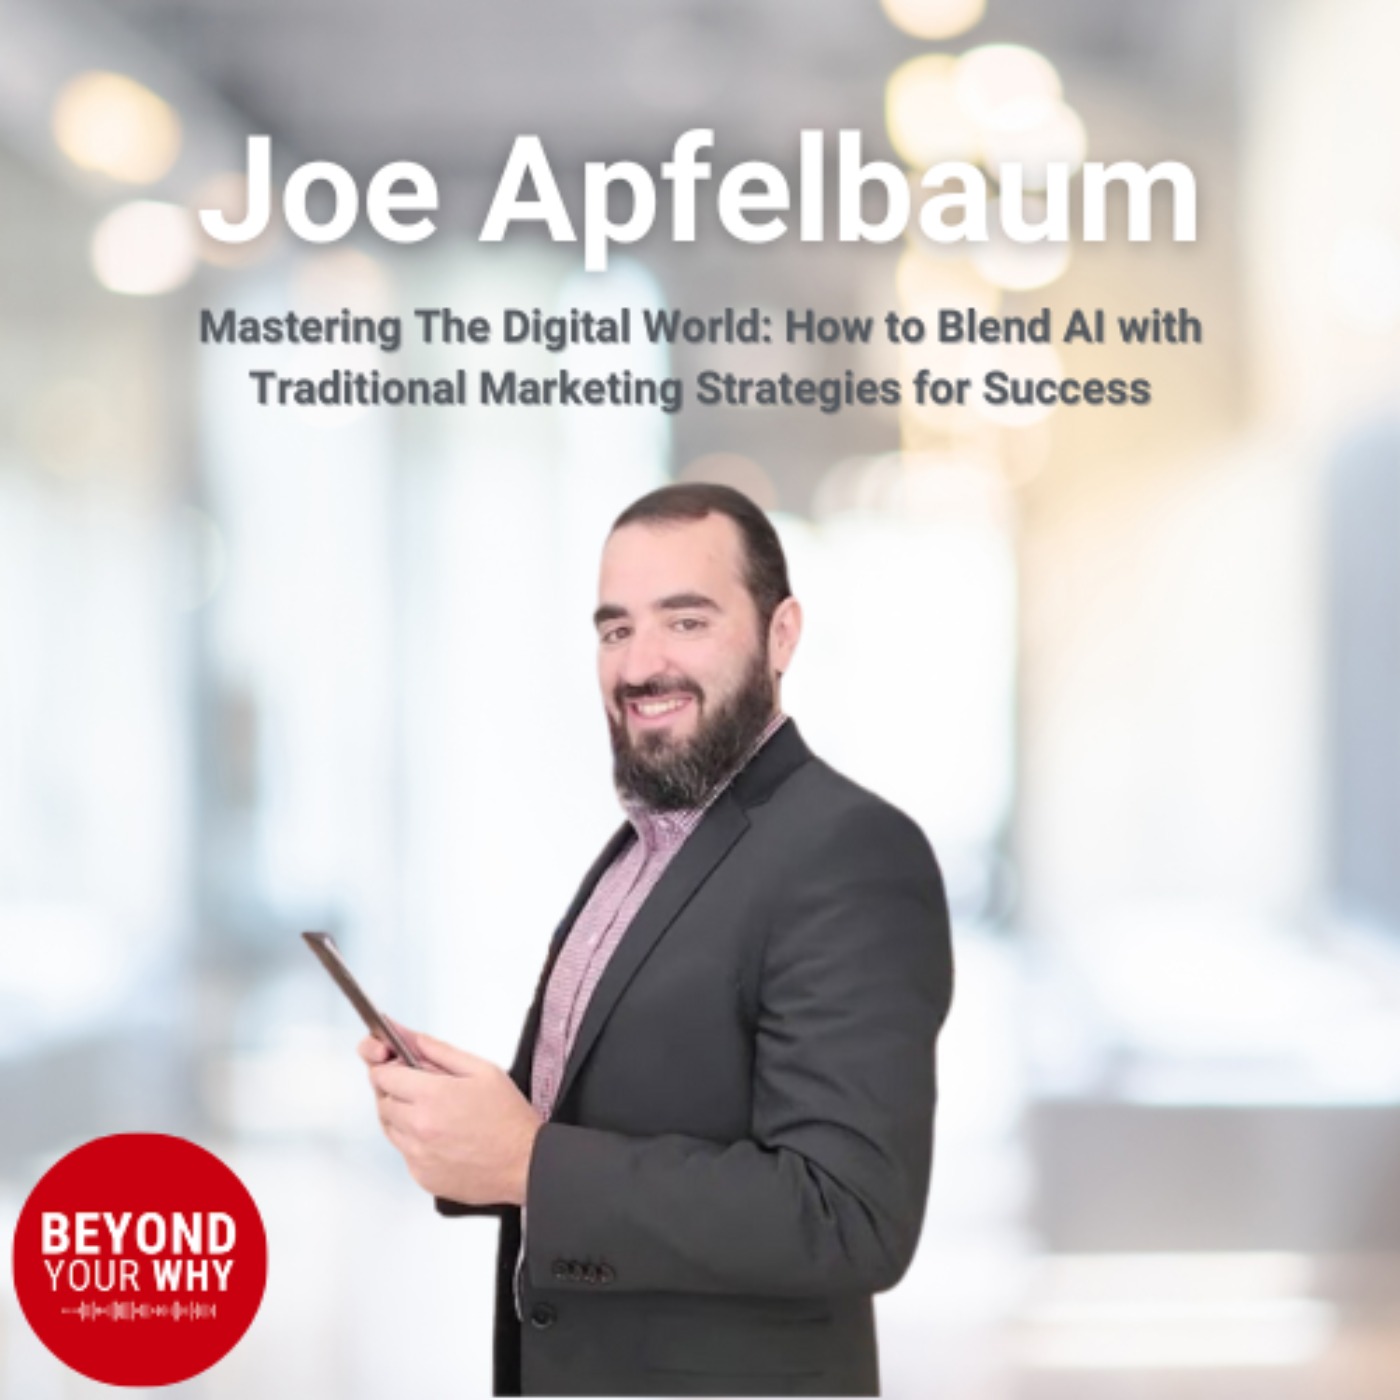 Mastering the Digital World: How Joe Apfelbaum Blends AI with Traditional Marketing for Success